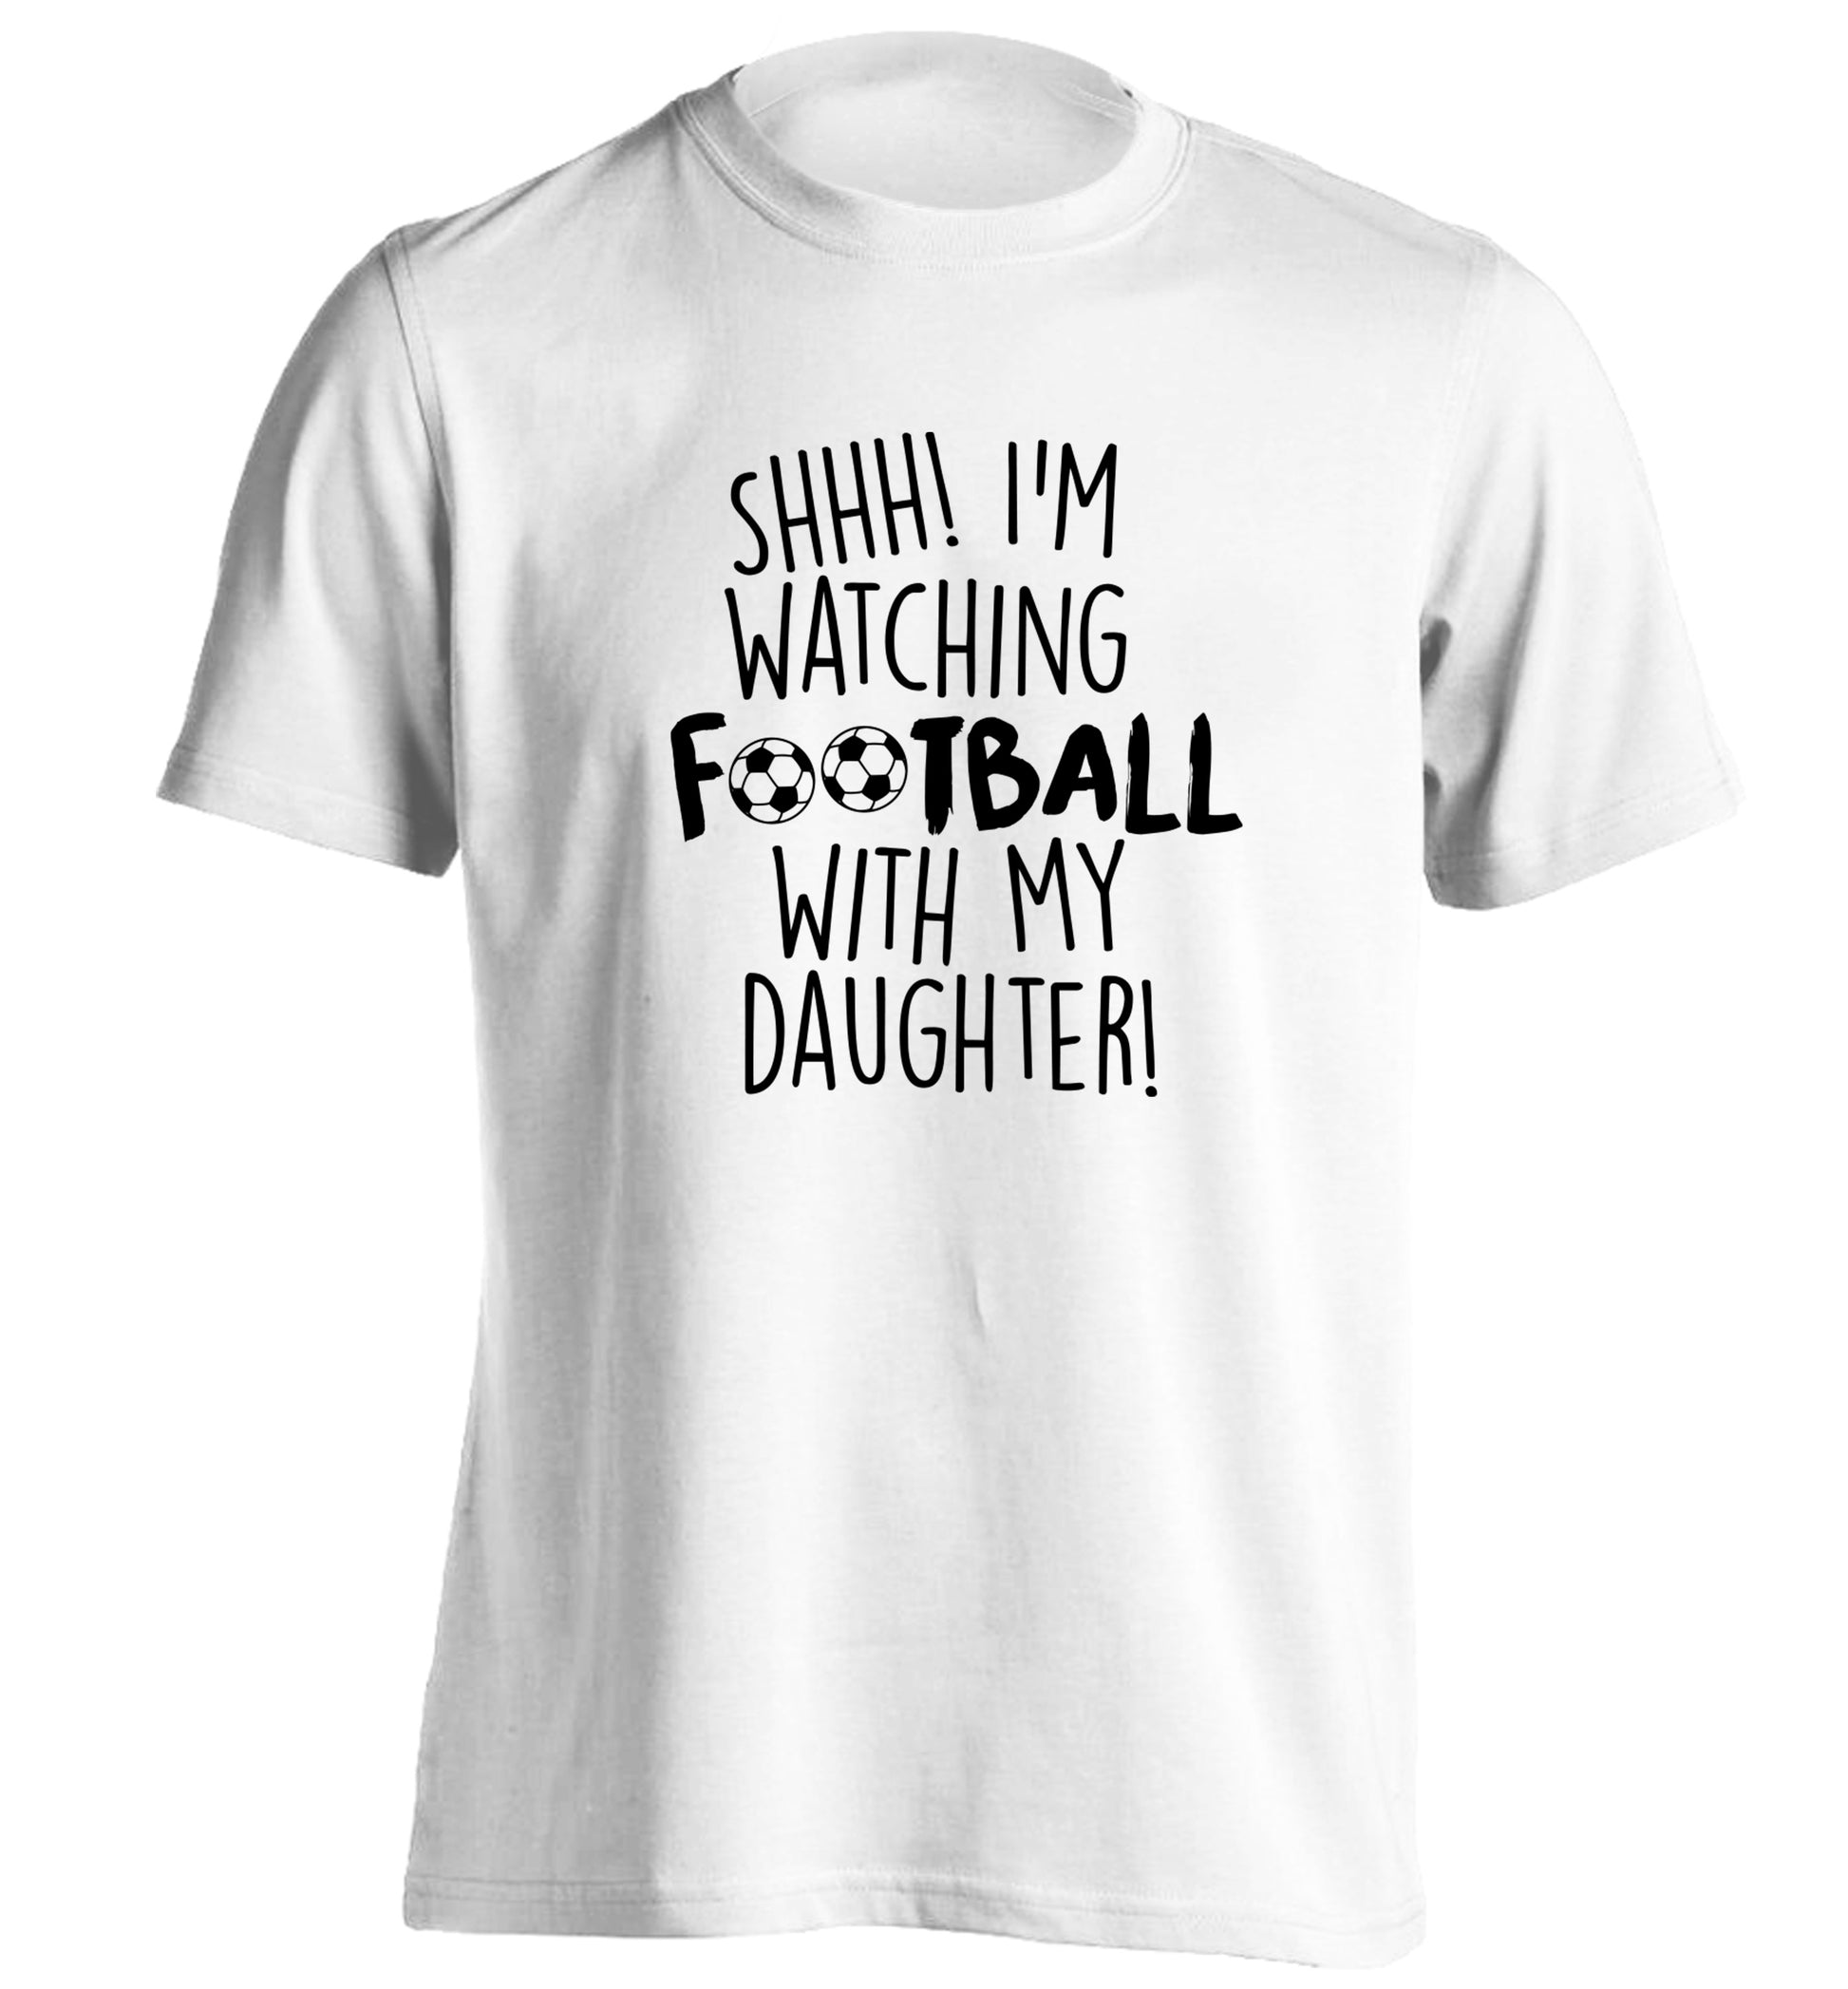 Shhh I'm watching football with my daughter adults unisexwhite Tshirt 2XL